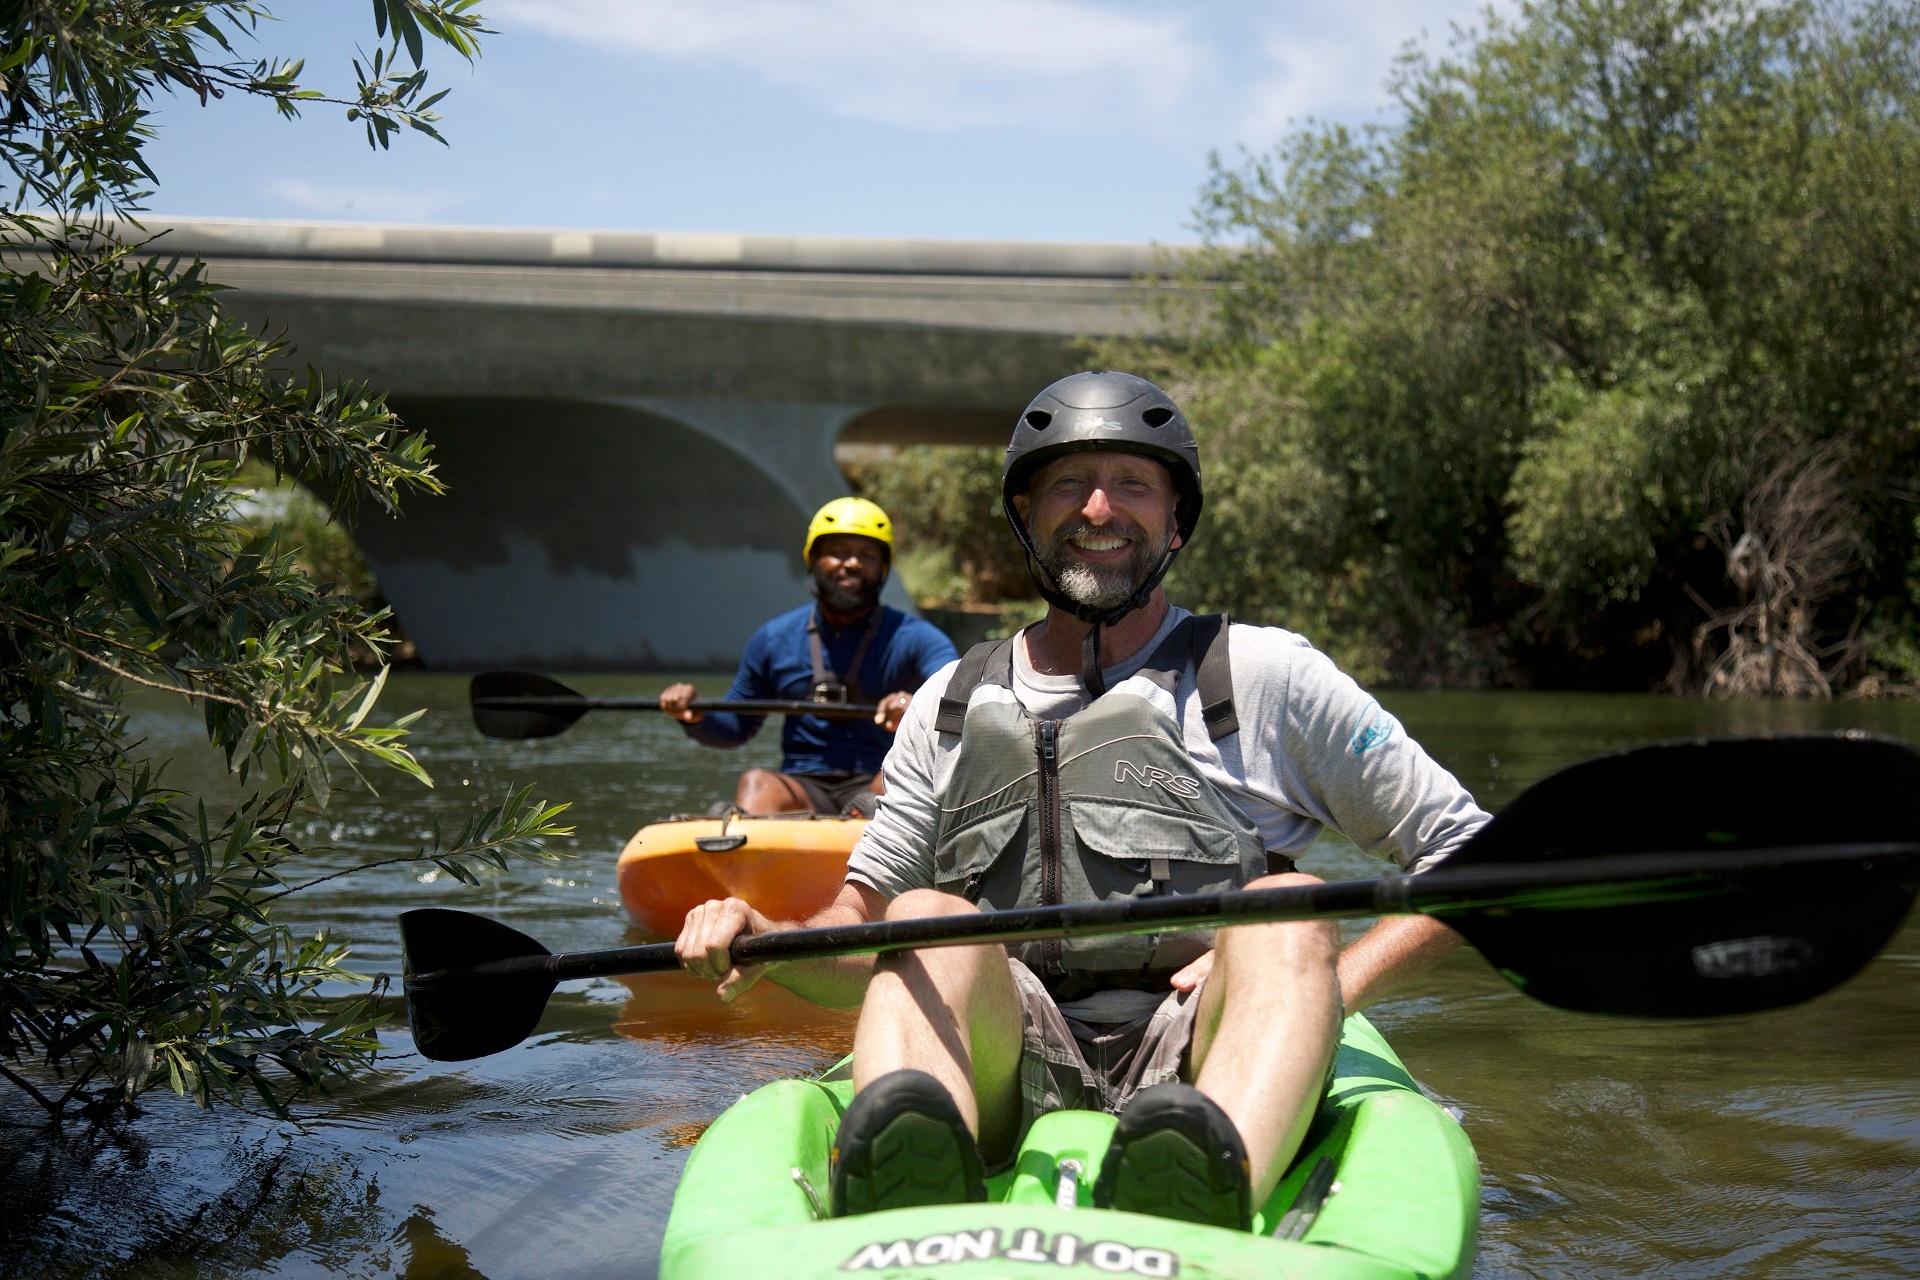 George Wolfe kayaking with Baratunde Thurston at the Sepulveda Basin